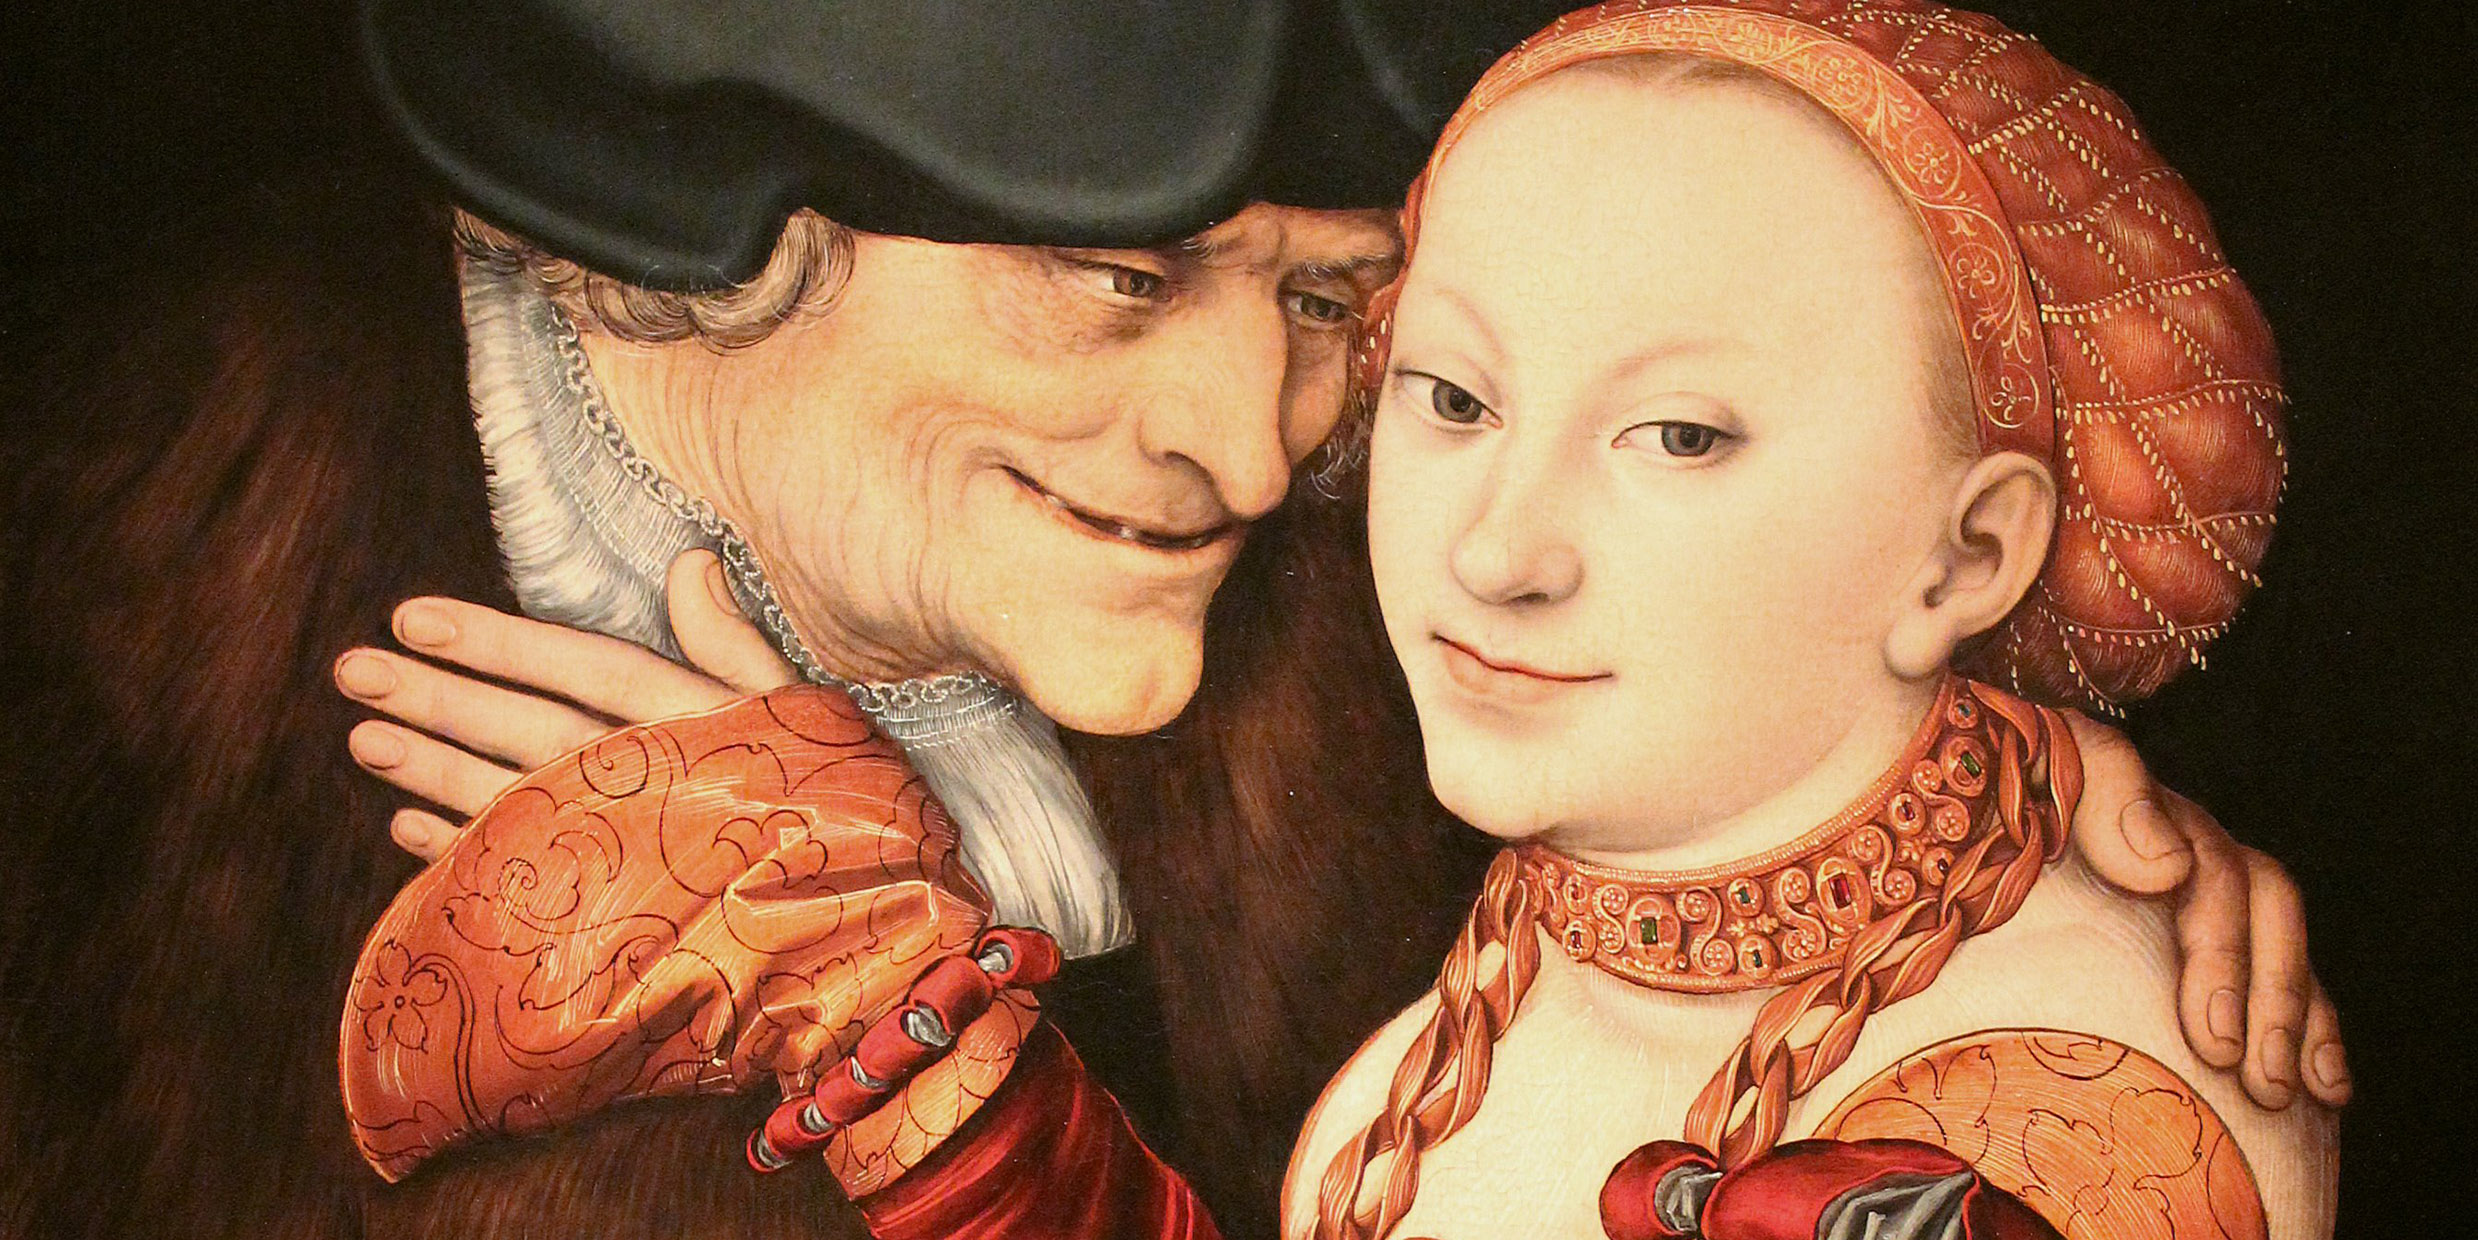 Painting of old man ogling a young woman